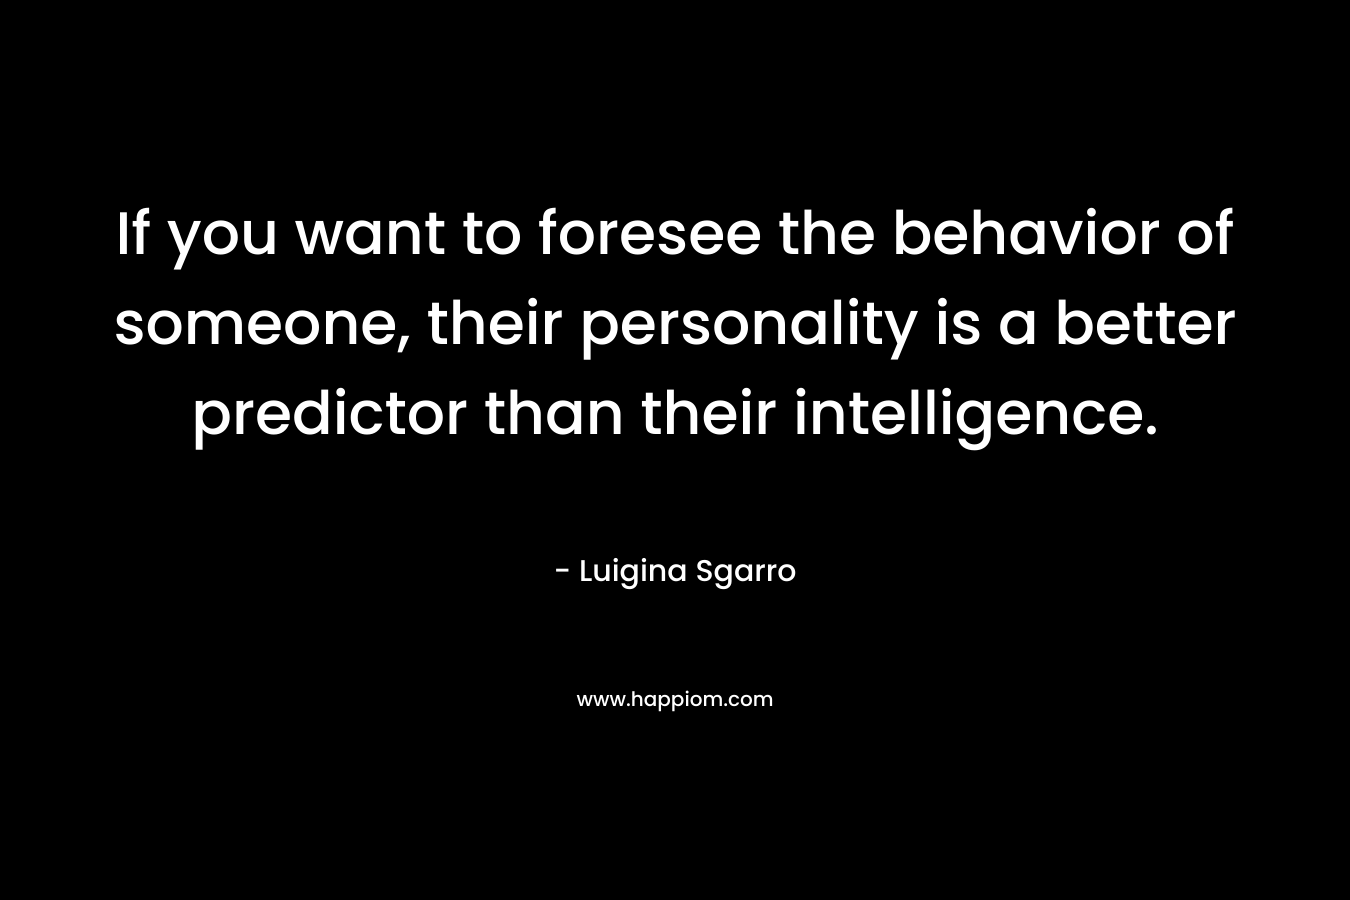 If you want to foresee the behavior of someone, their personality is a better predictor than their intelligence. – Luigina Sgarro